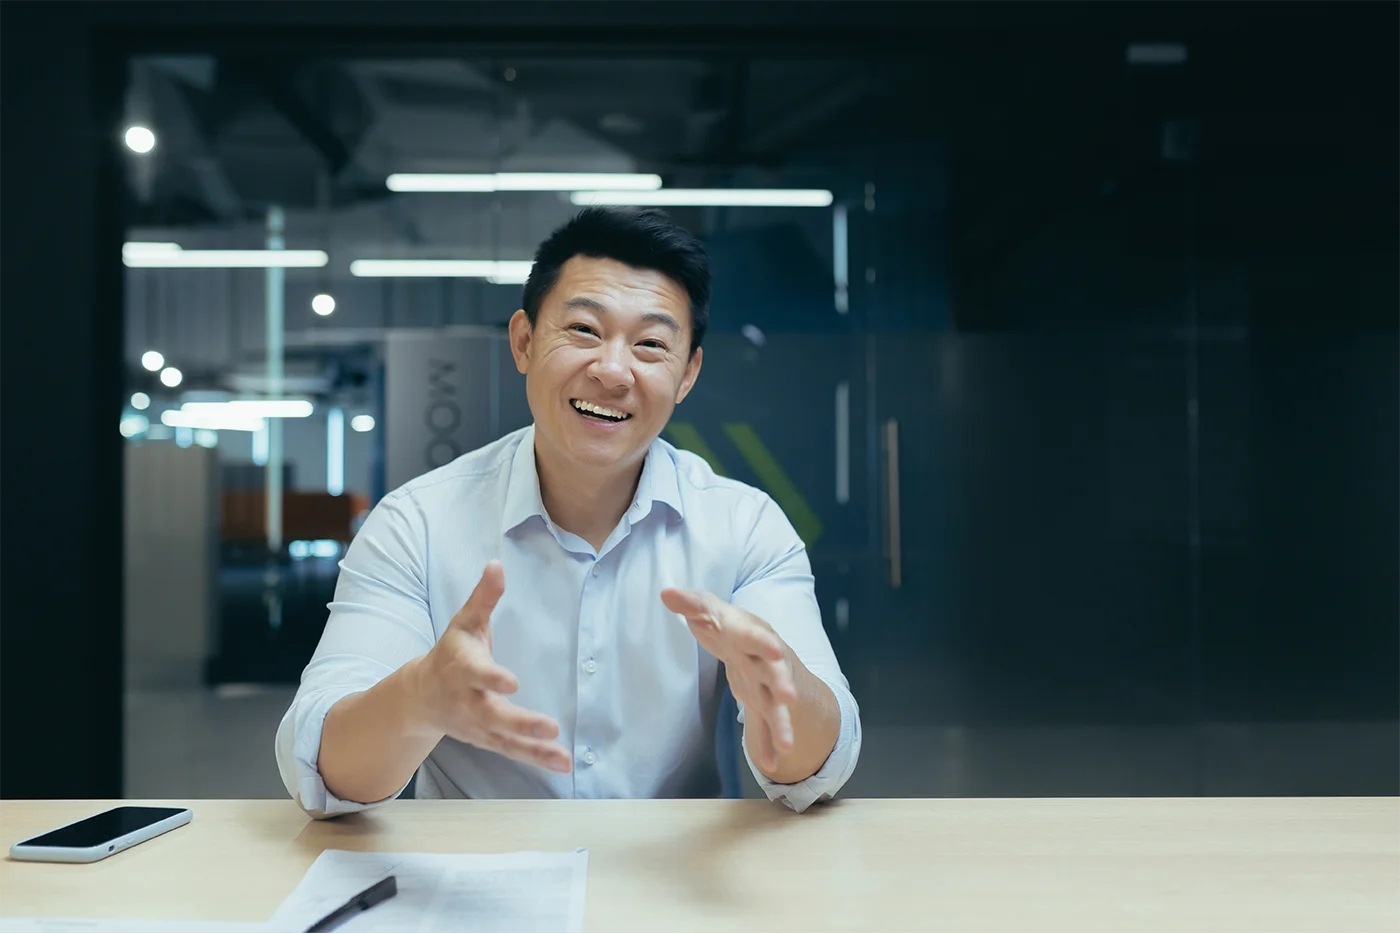 A corporate man presents across a wooden table, he is smiling and talking animatedly with his hands.